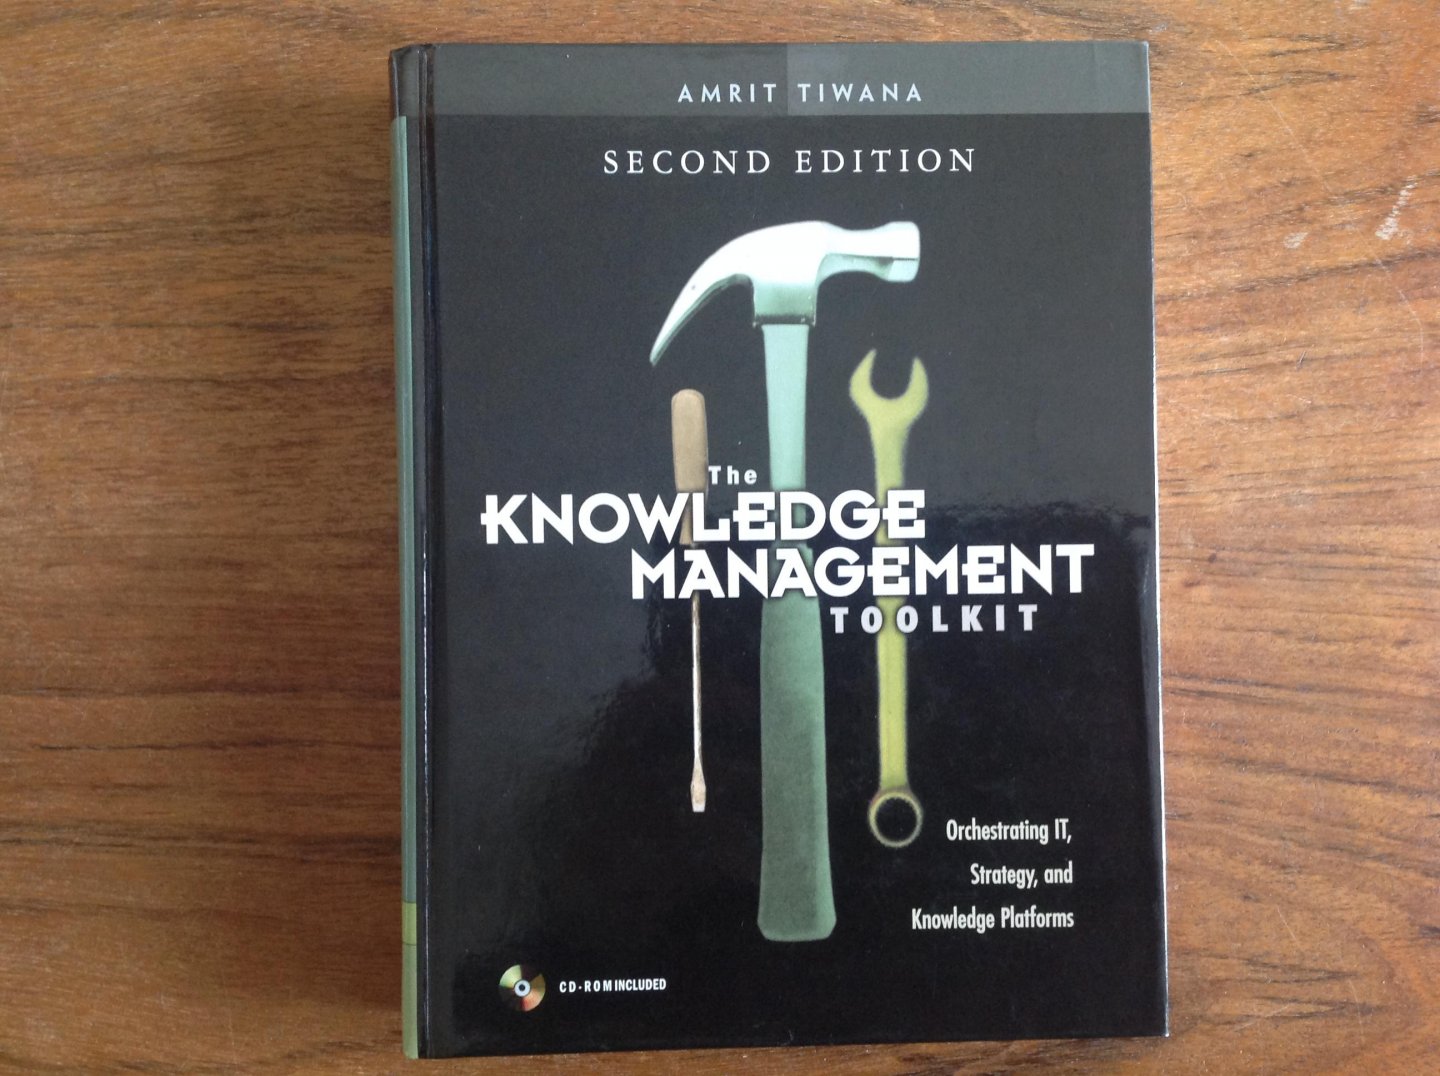 Tiwana Amrit - The Knowledge Management Toolkit  (Orchestrating IT, Strategy, and Knowledge Platforms)